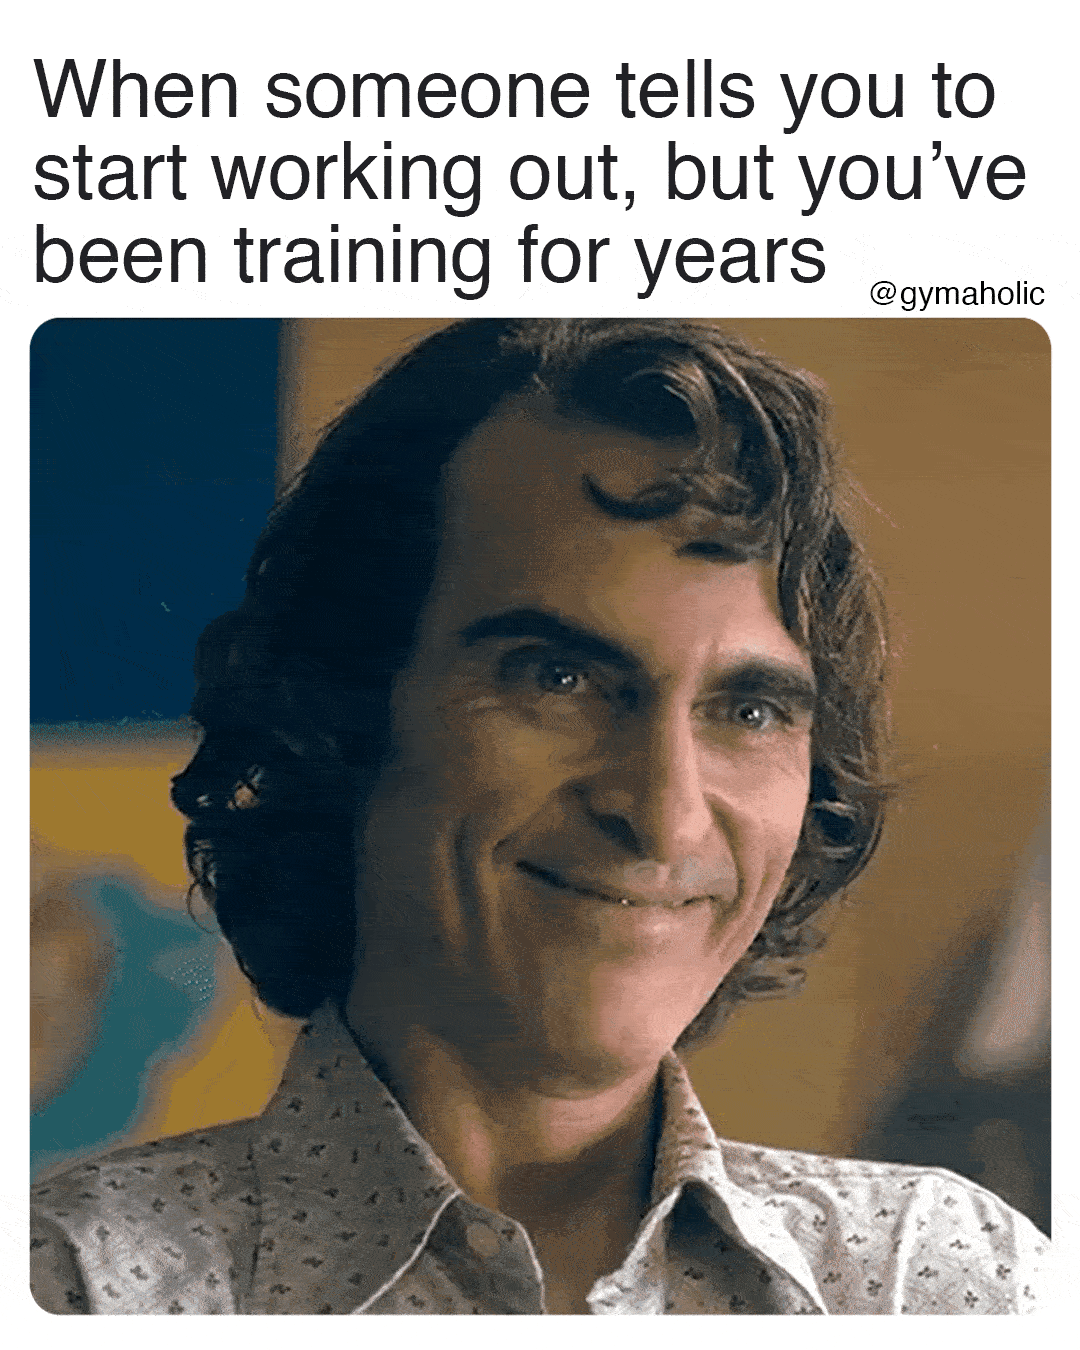 When someone tells you to start working out